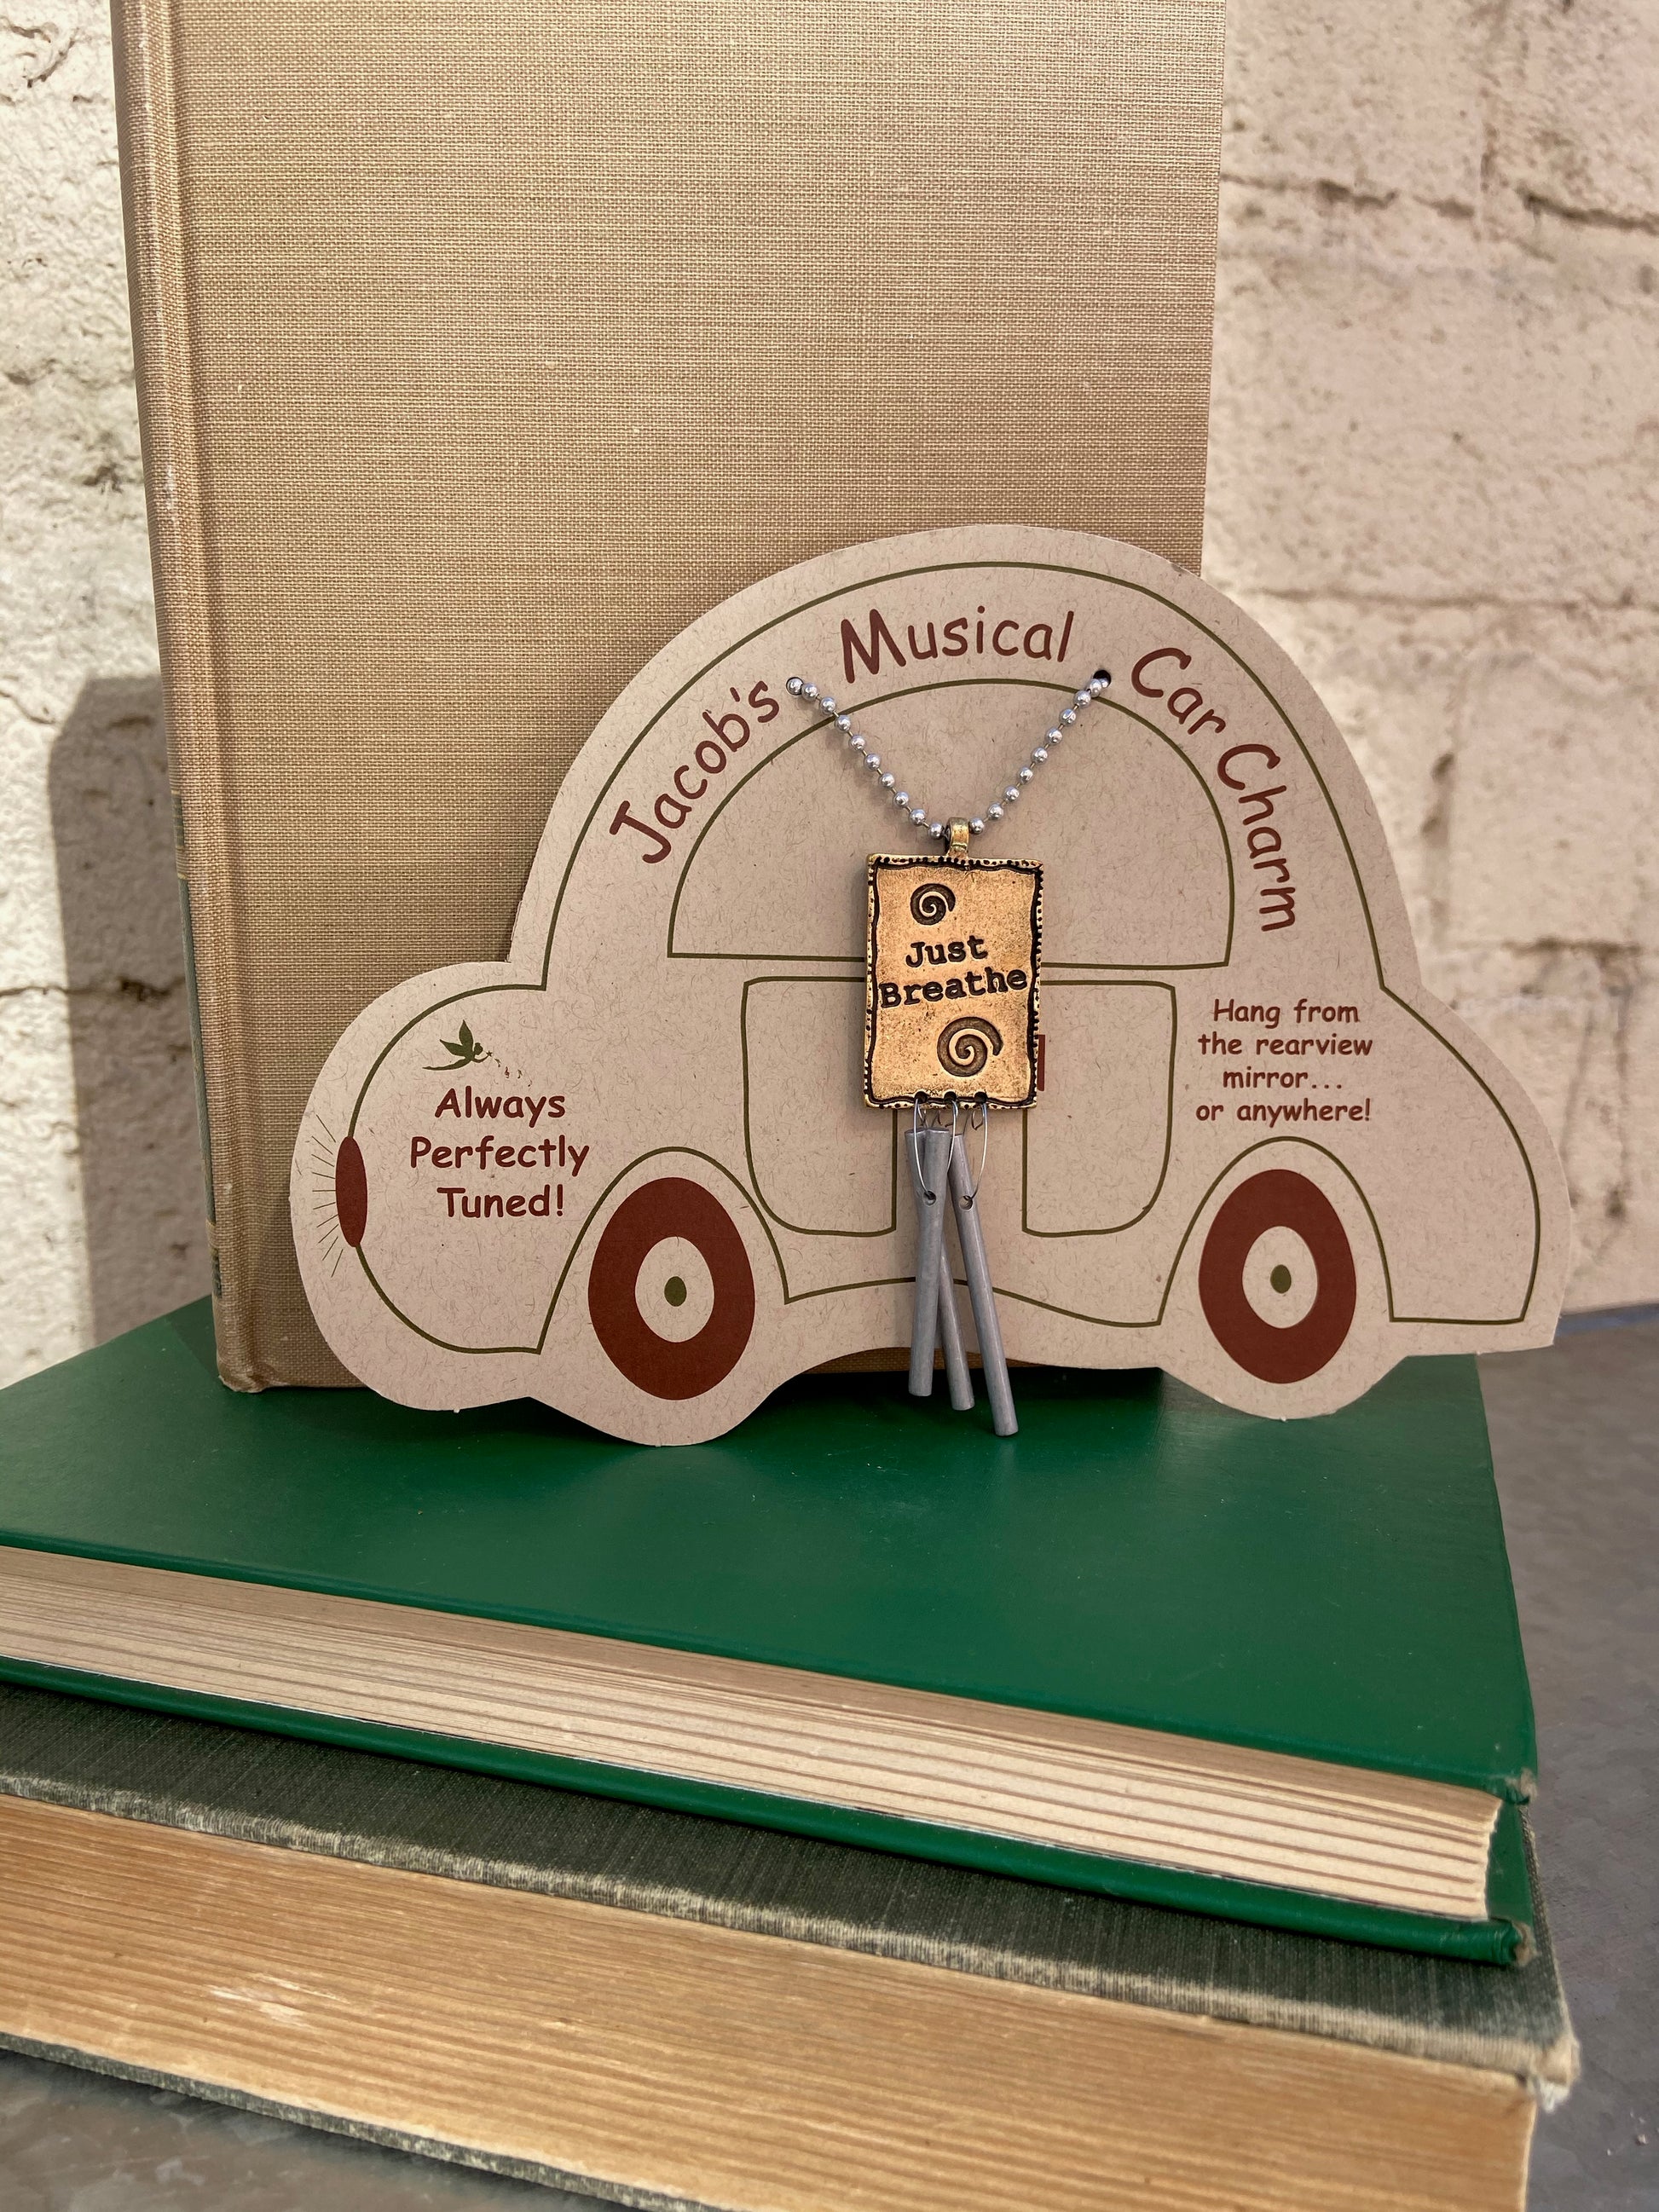 Musical Car Charms will soothe and relax as you navigate the busy highways of life. Cast metal charm is etched on both sides and finished in antique brass. Relaxing and pleasing sound from three perfectly tuned aluminum pipes. Musical instrument and chime maker Jacob Sokoloff hand tunes these car chimes to produce a musical sound guaranteed to make you smile. Dimensions: 3 inches tall plus 9 inch ball chain.